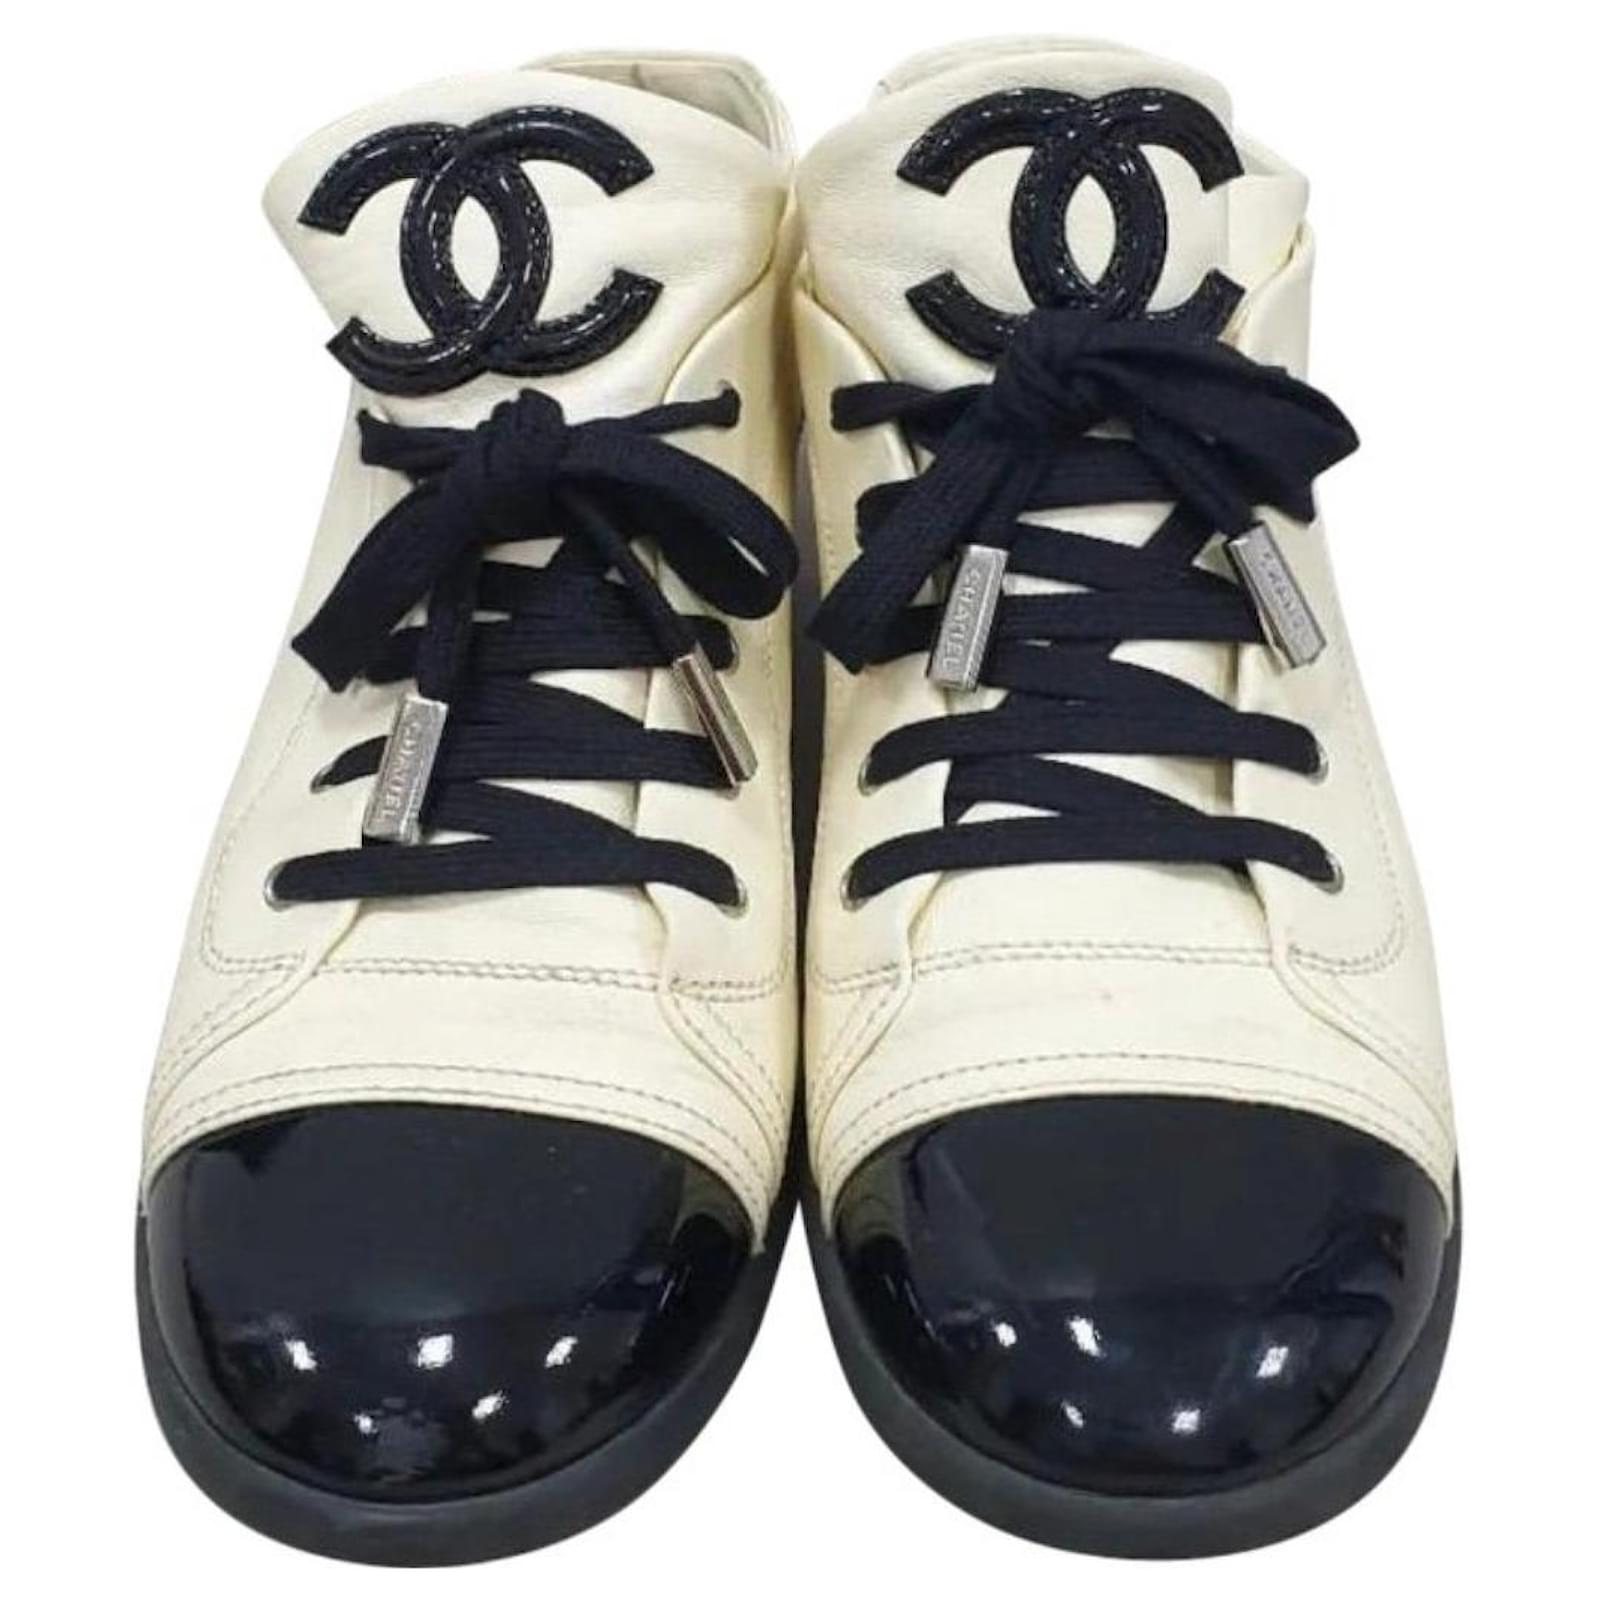 Sneakers Chanel Chanel White Black Patent Leather Captoe CC Logo Sneakers